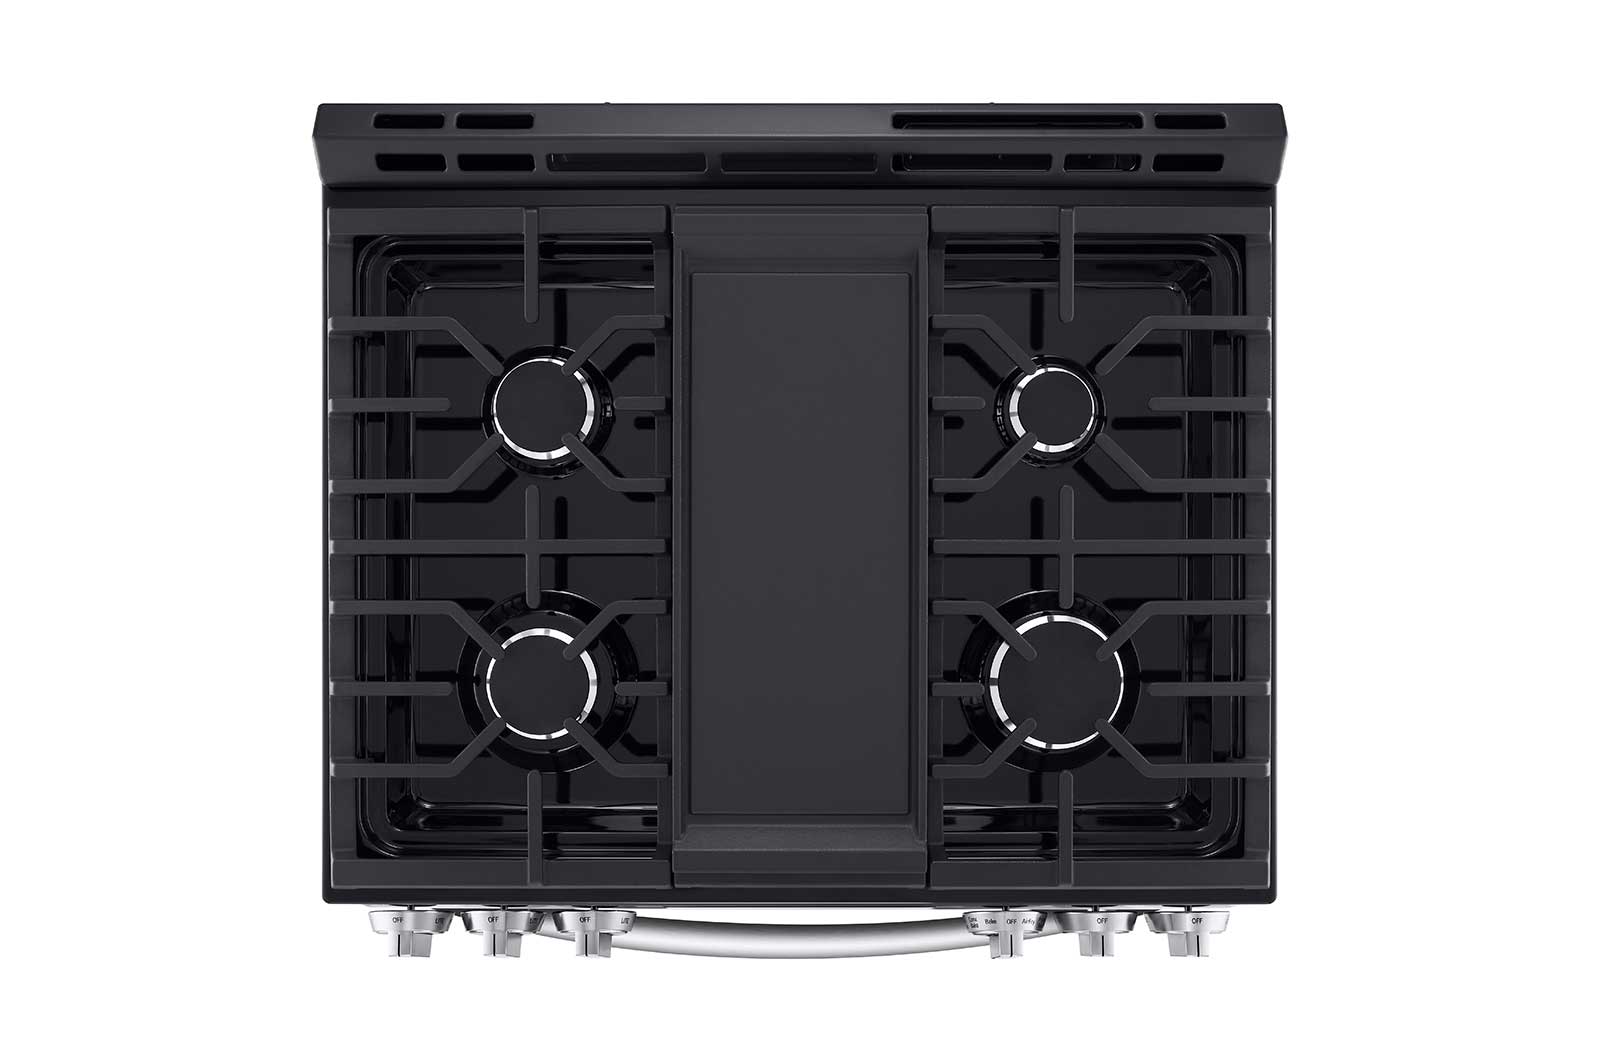 5.8 cu ft. Smart Wi-Fi Enabled Fan Convection Gas Slide-in Range with Air Fry & EasyClean®